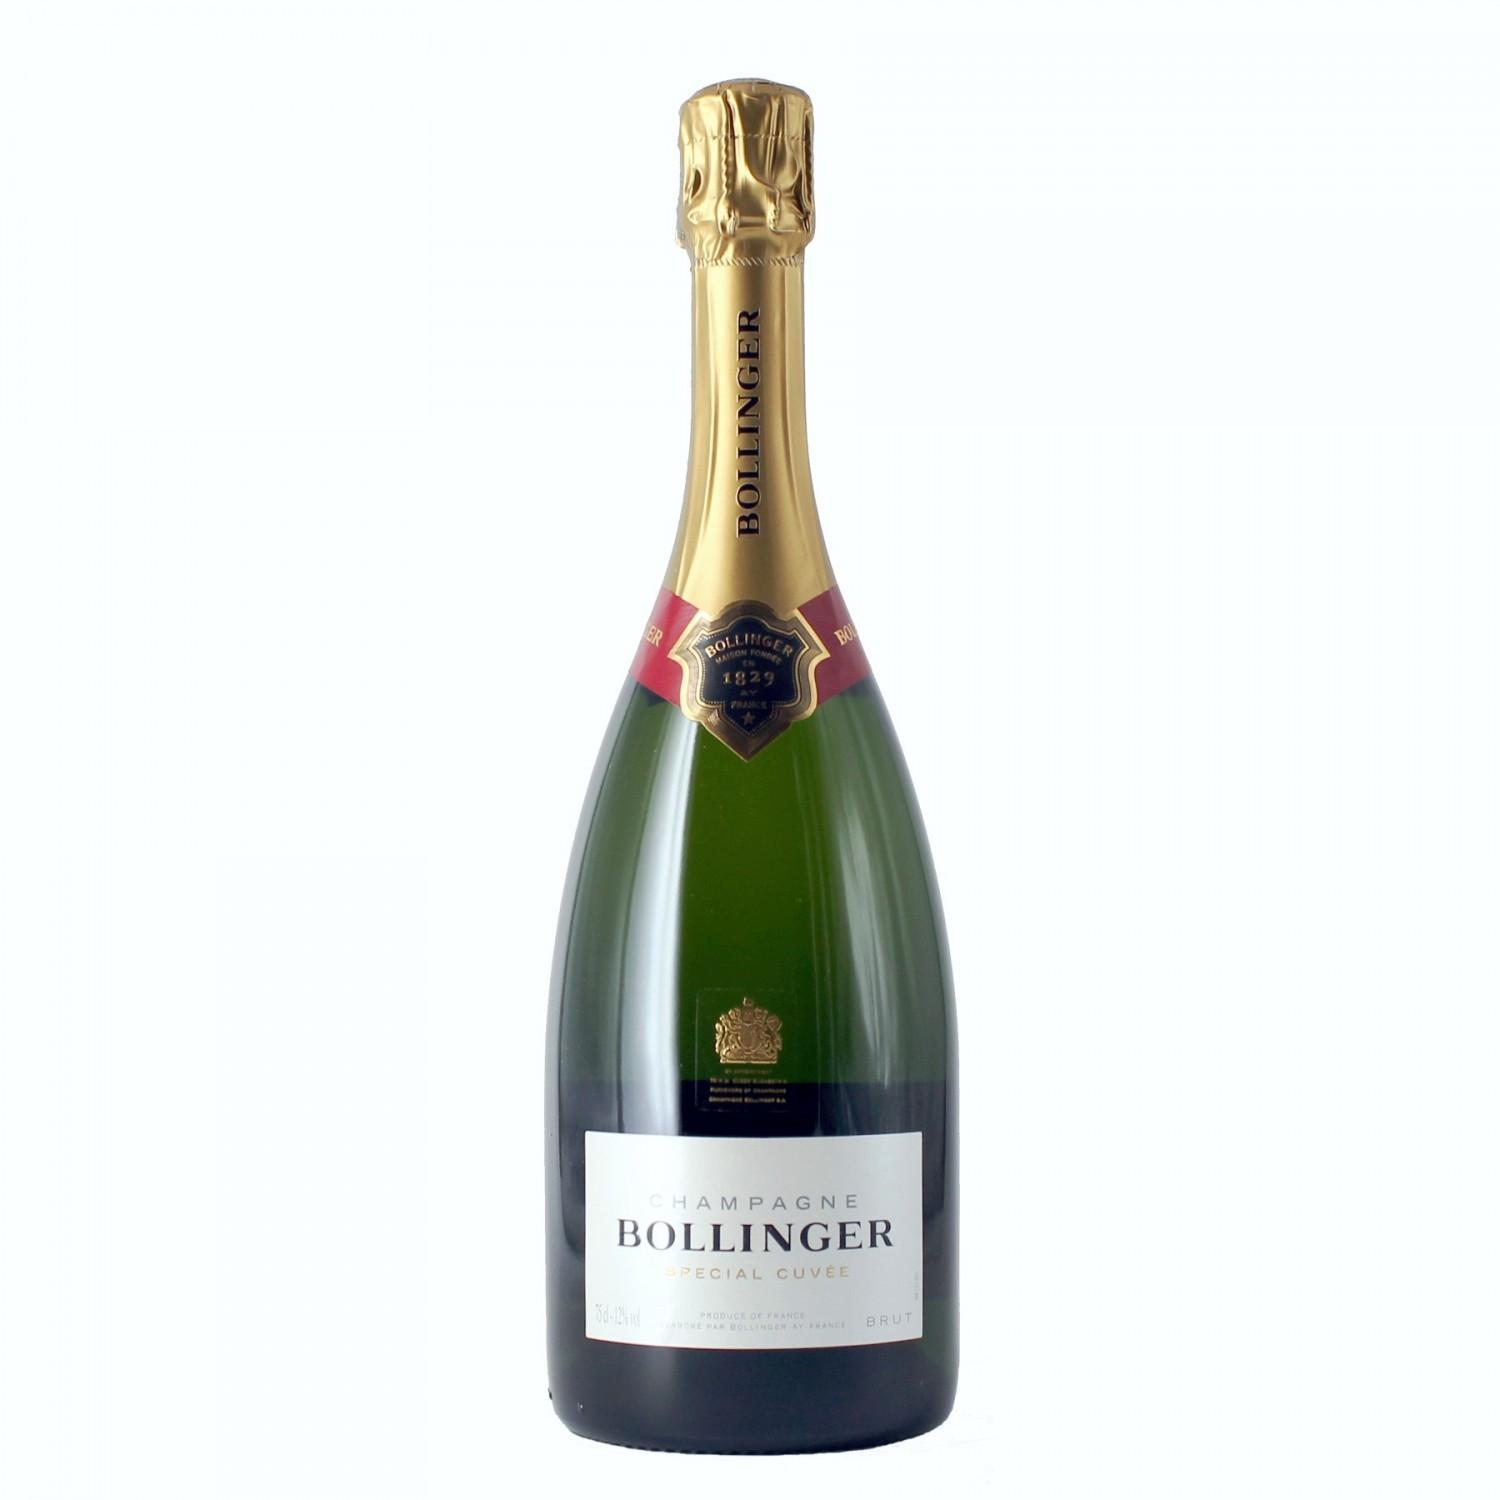 champagne-special-cuvee-brut-bollinger-75-cl-1